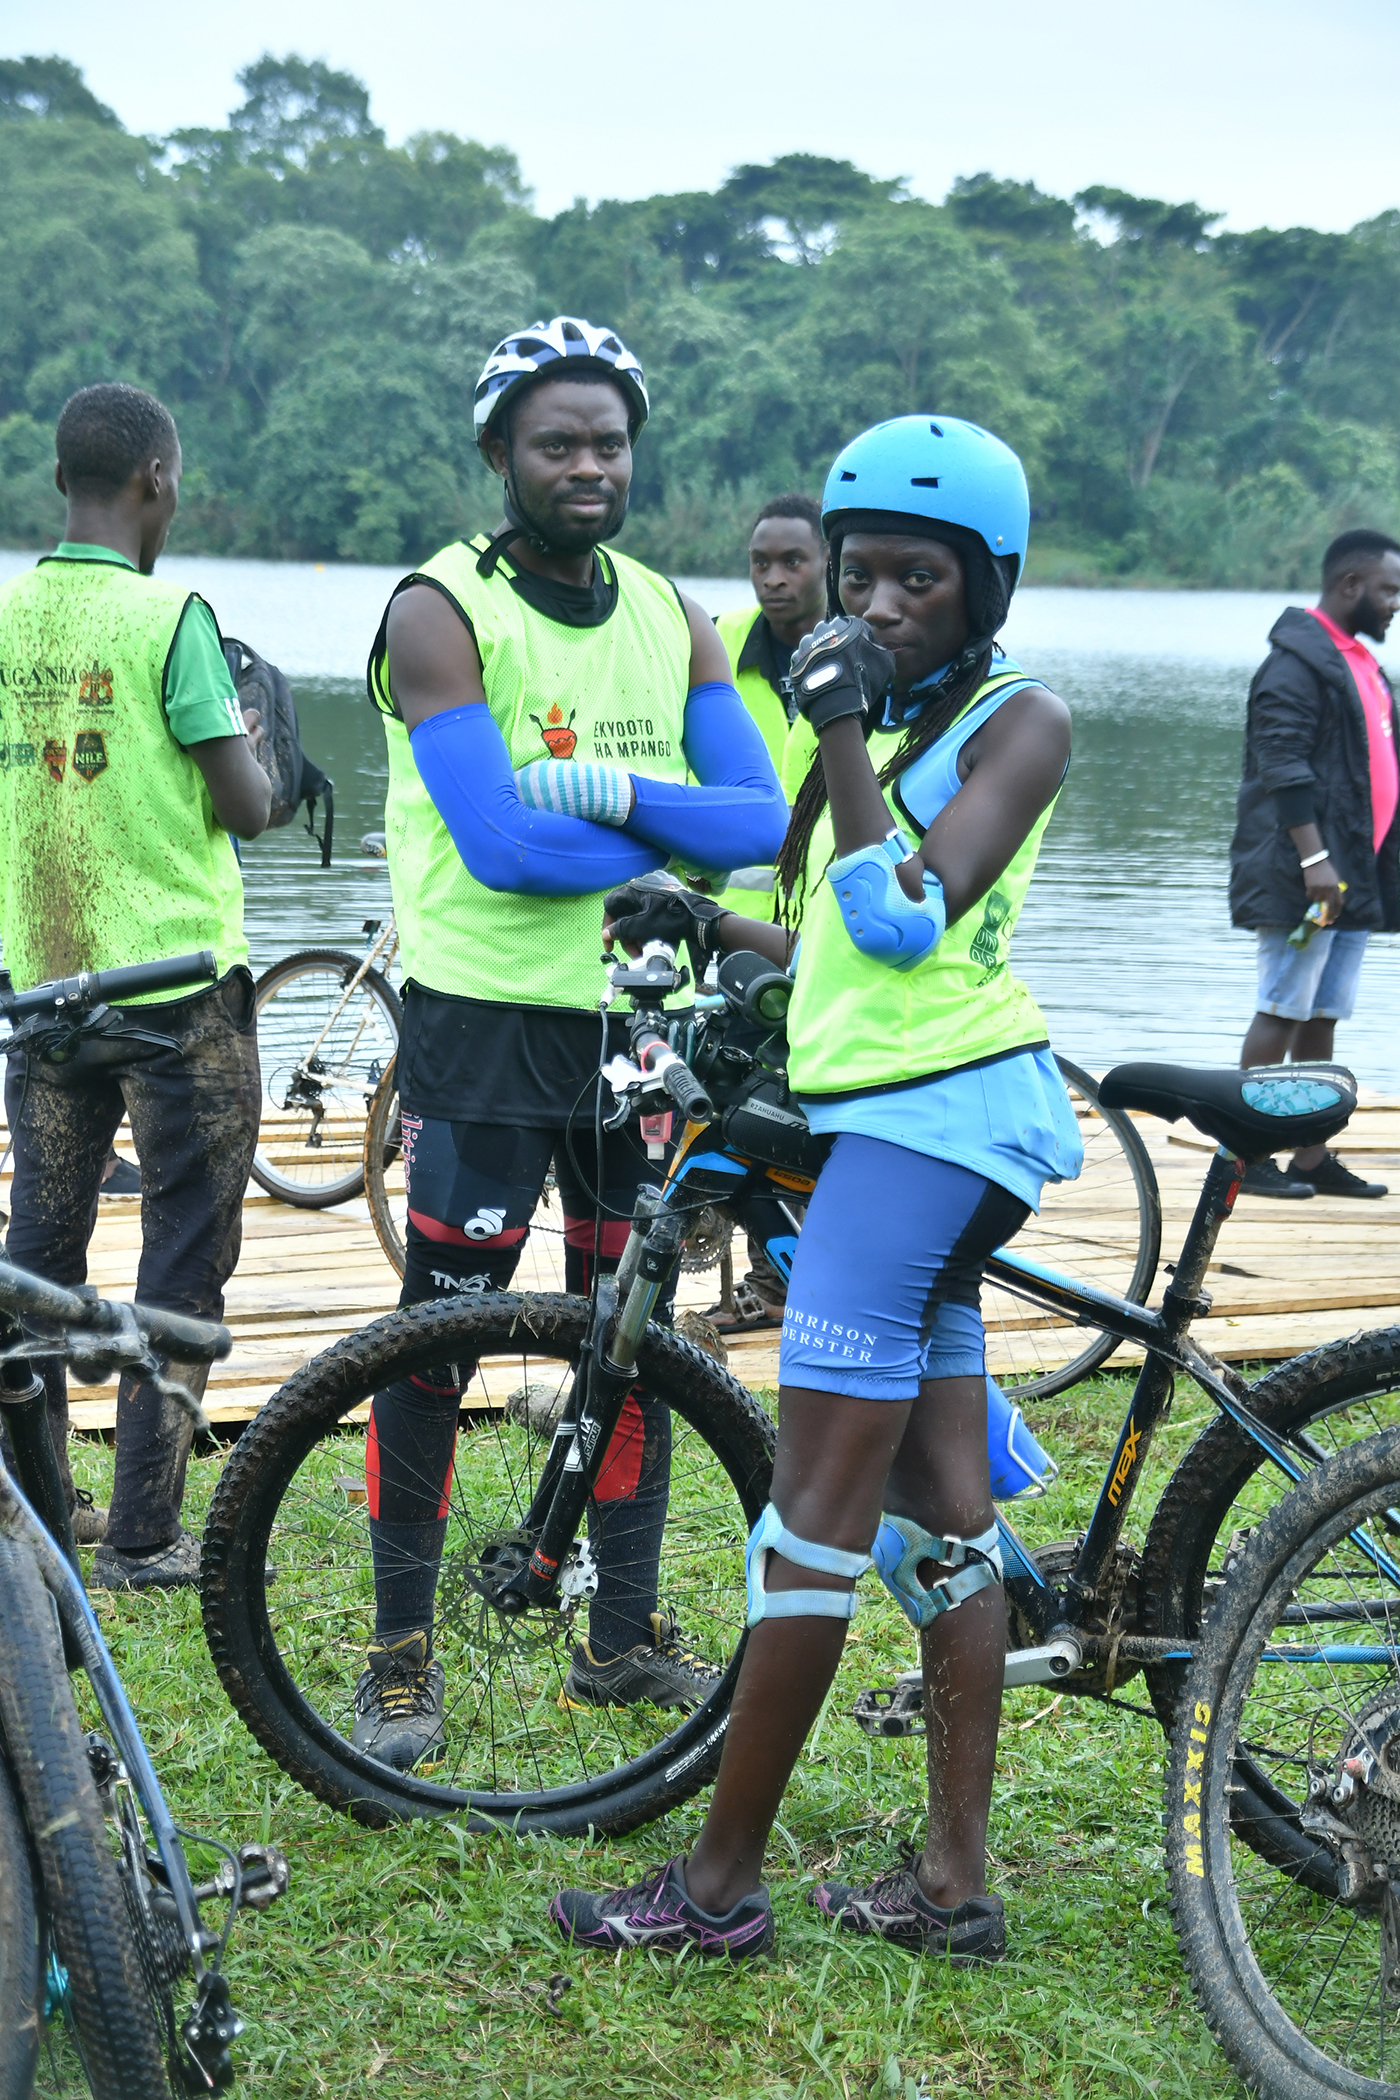 A group of passionate cyclists cycled all the way from Kampala to Fort Portal, from 6am to 11pm. Photo by EDGAR R. BATTE